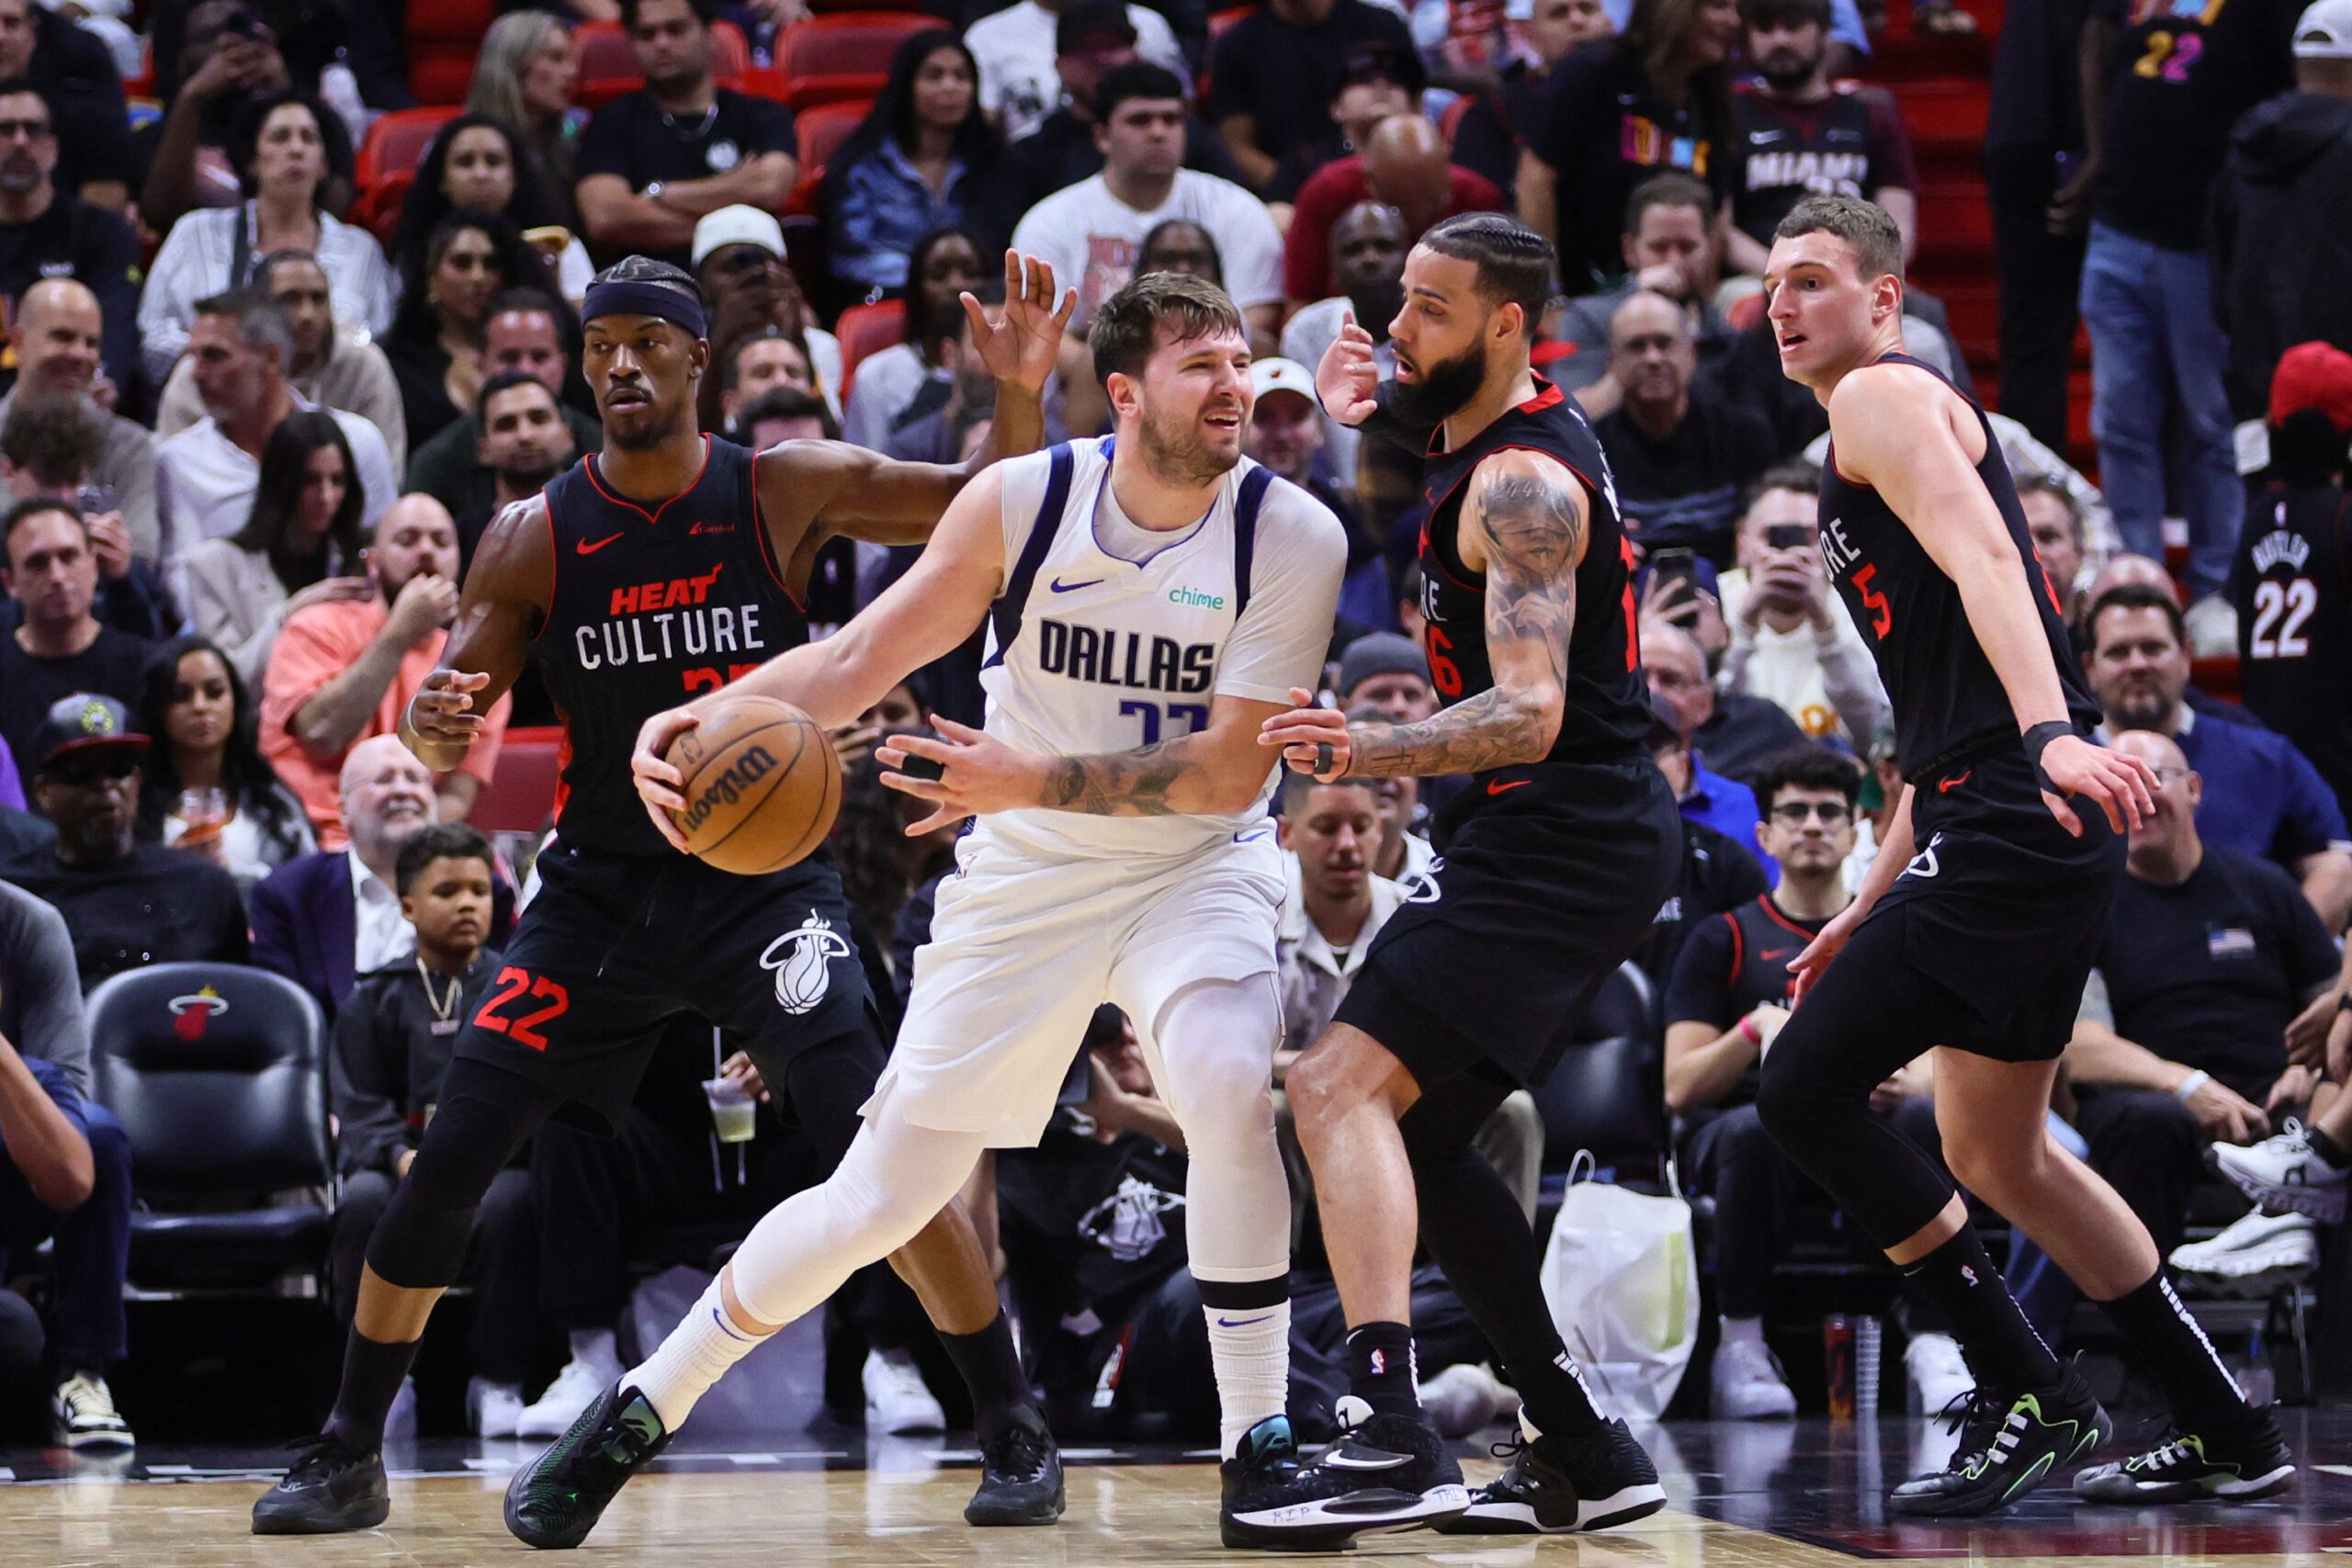 Doncic, Irving combine for 54 as streaking Mavericks drub cold Heat